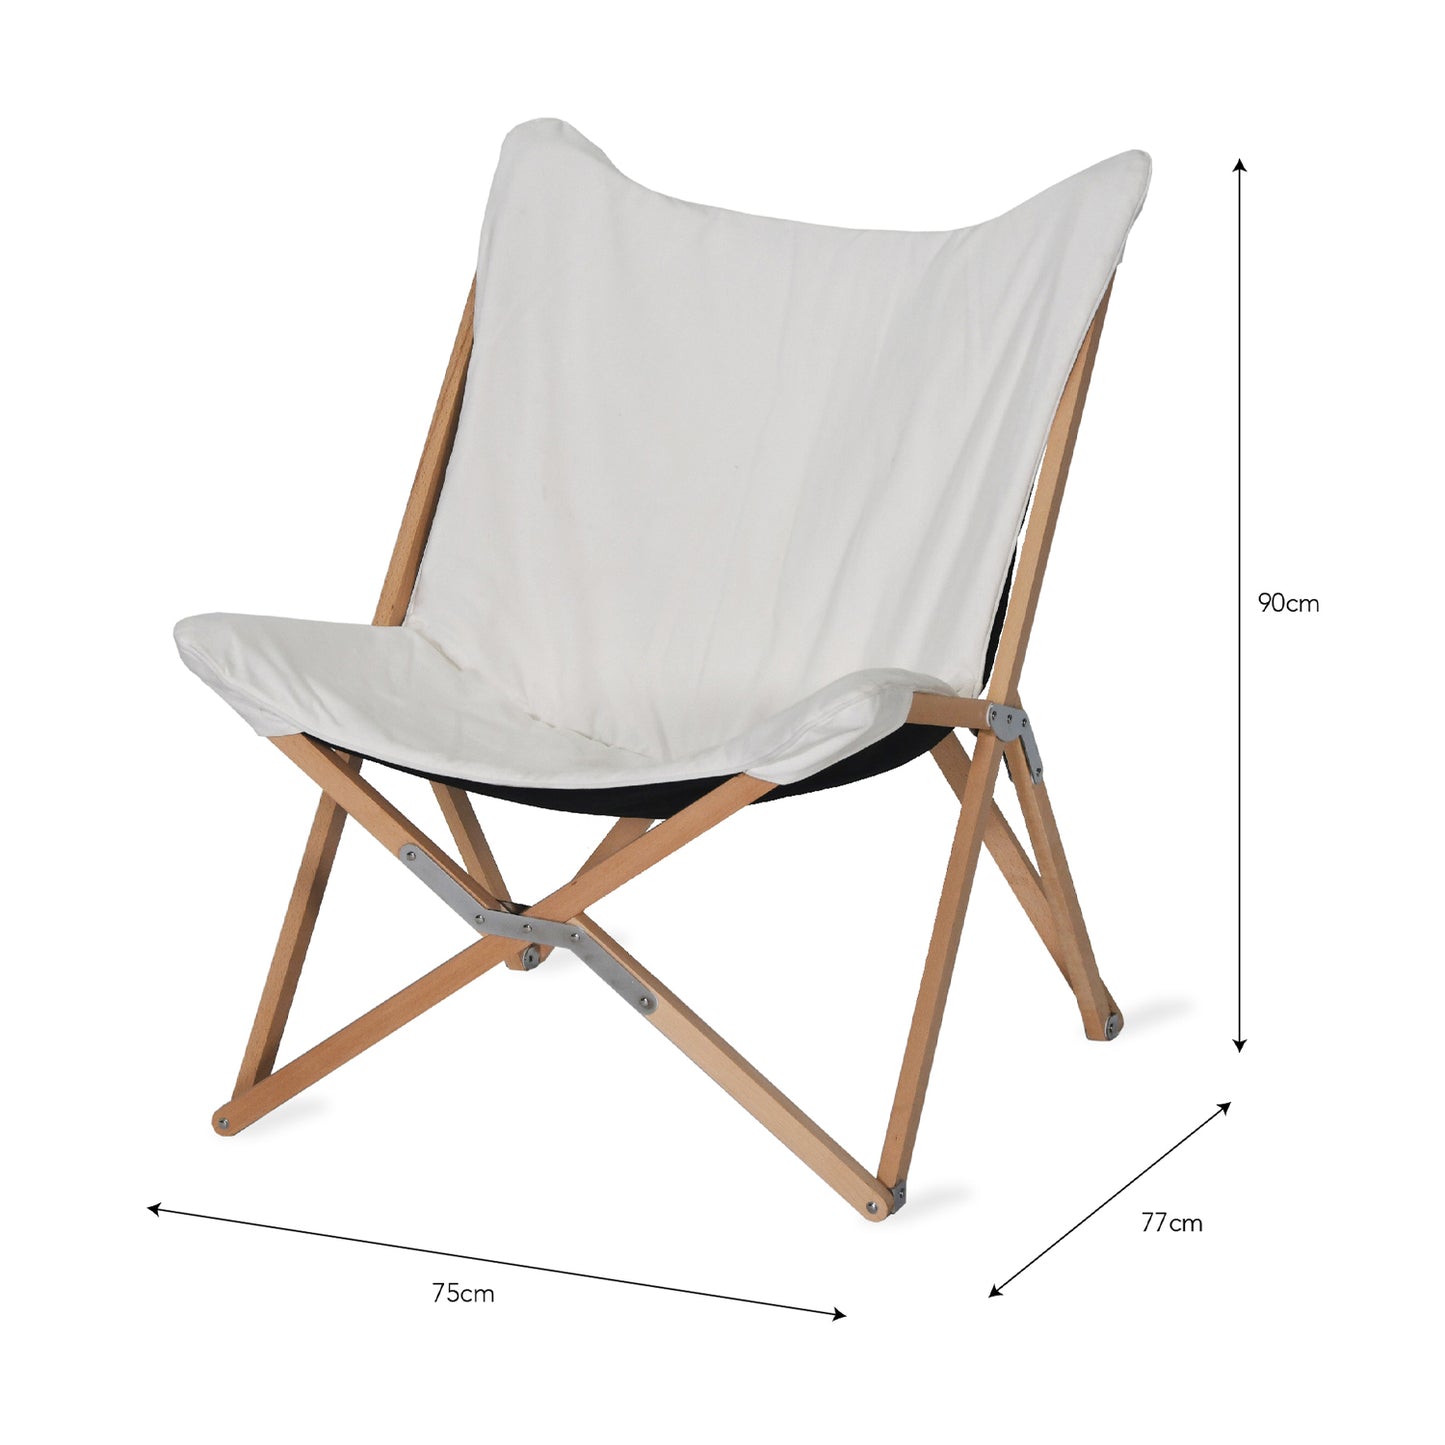 Wimborne Butterfly Outdoor Chair by Garden Trading